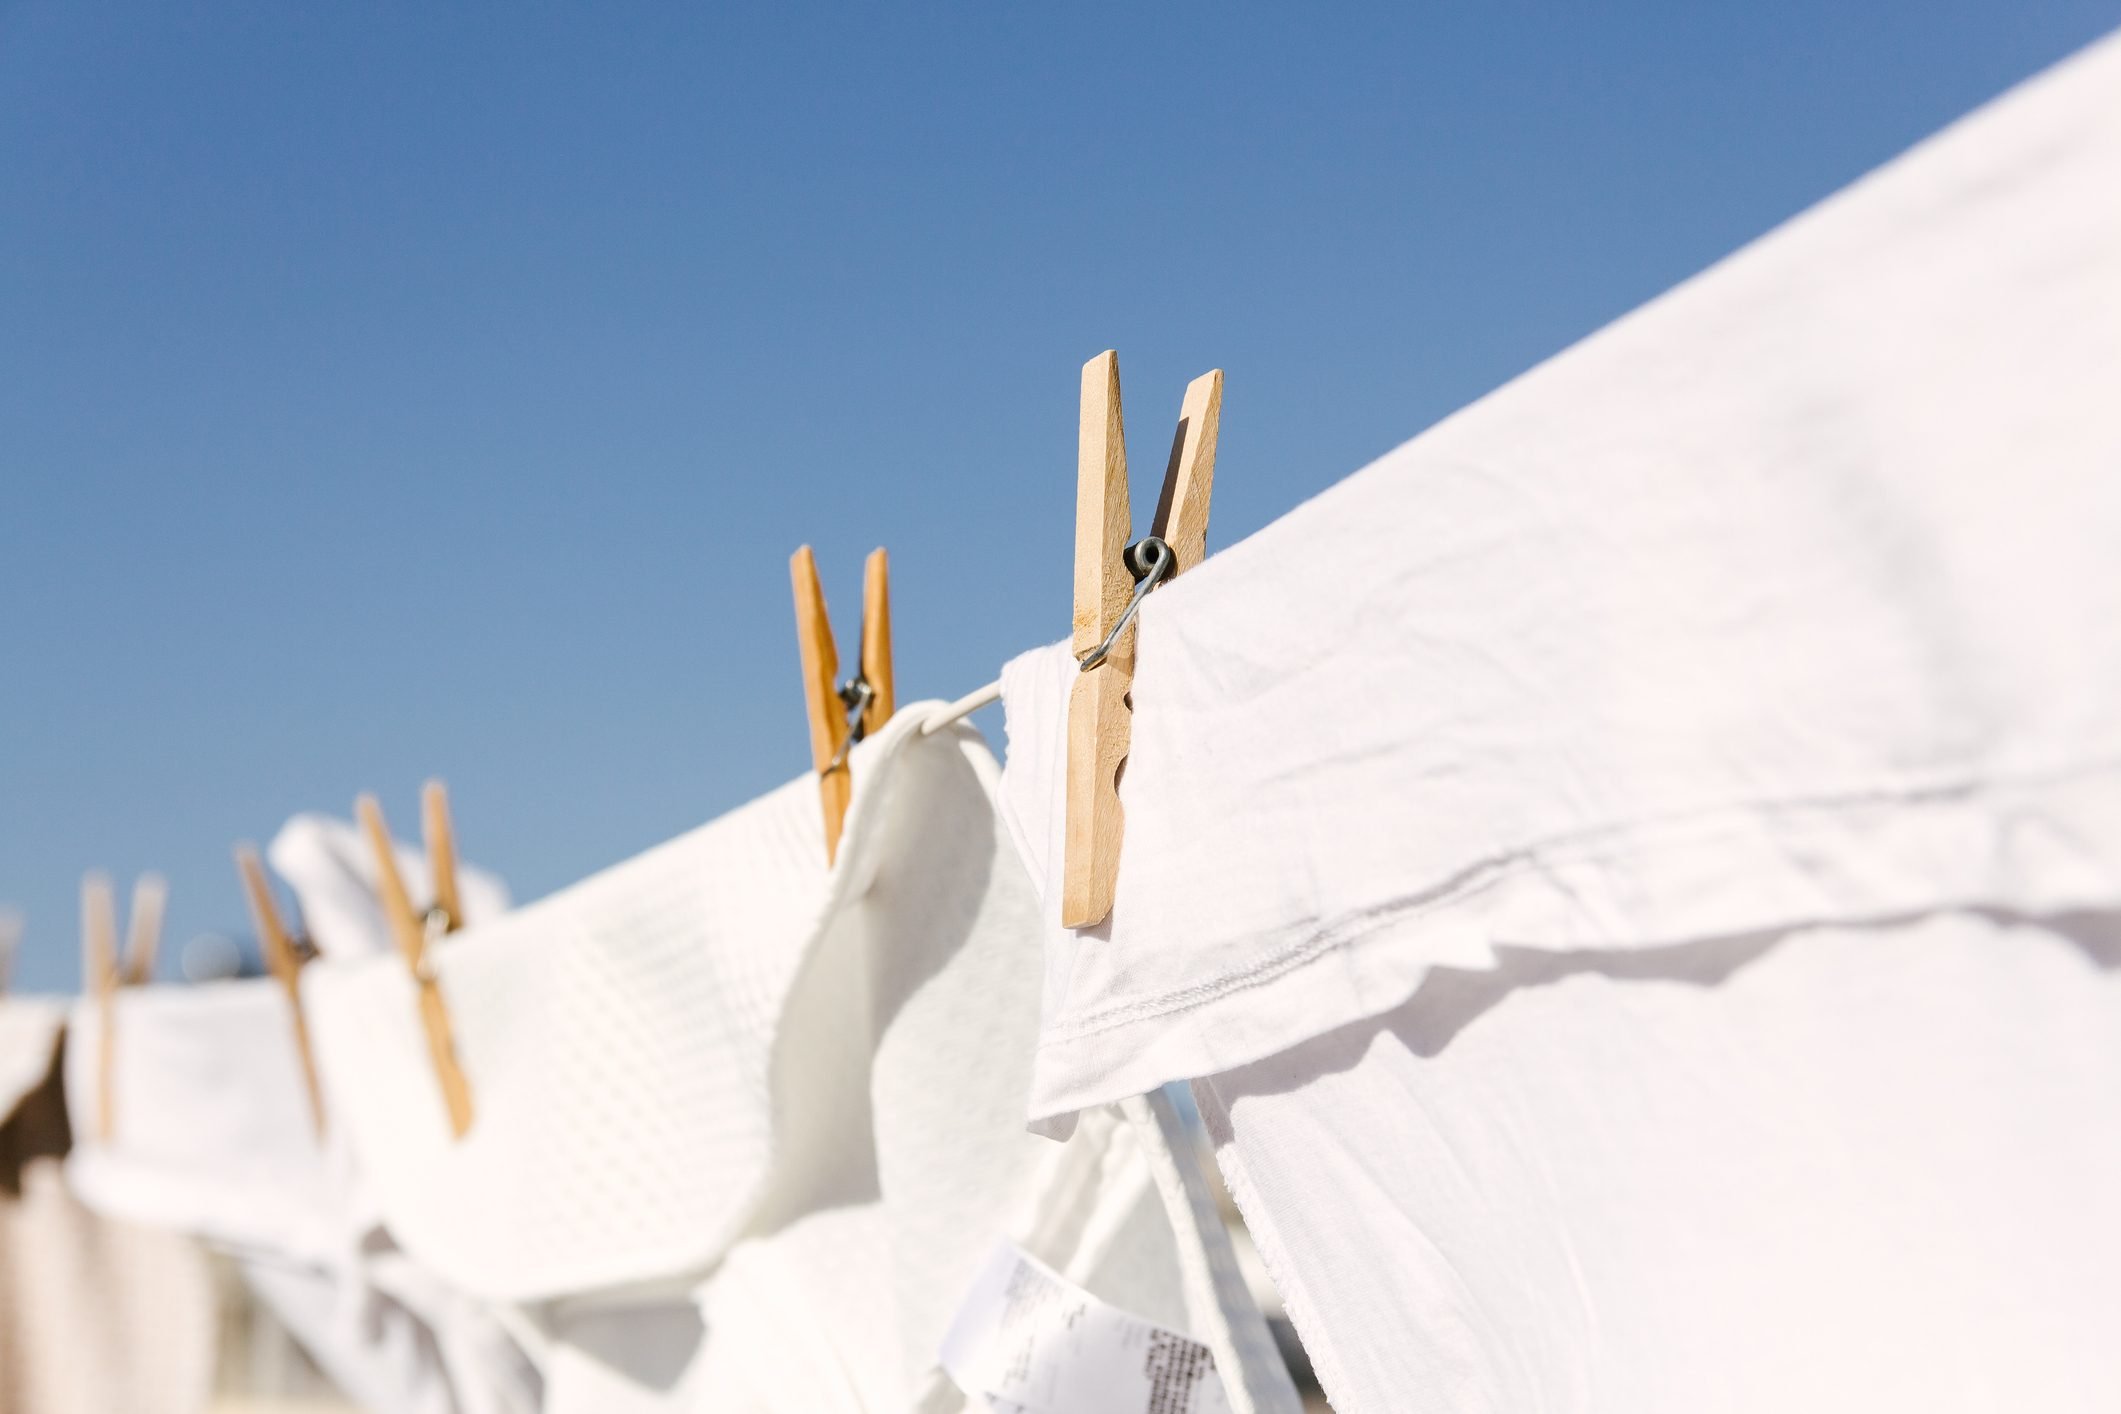 White shrunken clothes hung out to dry on a washing line in the sun.